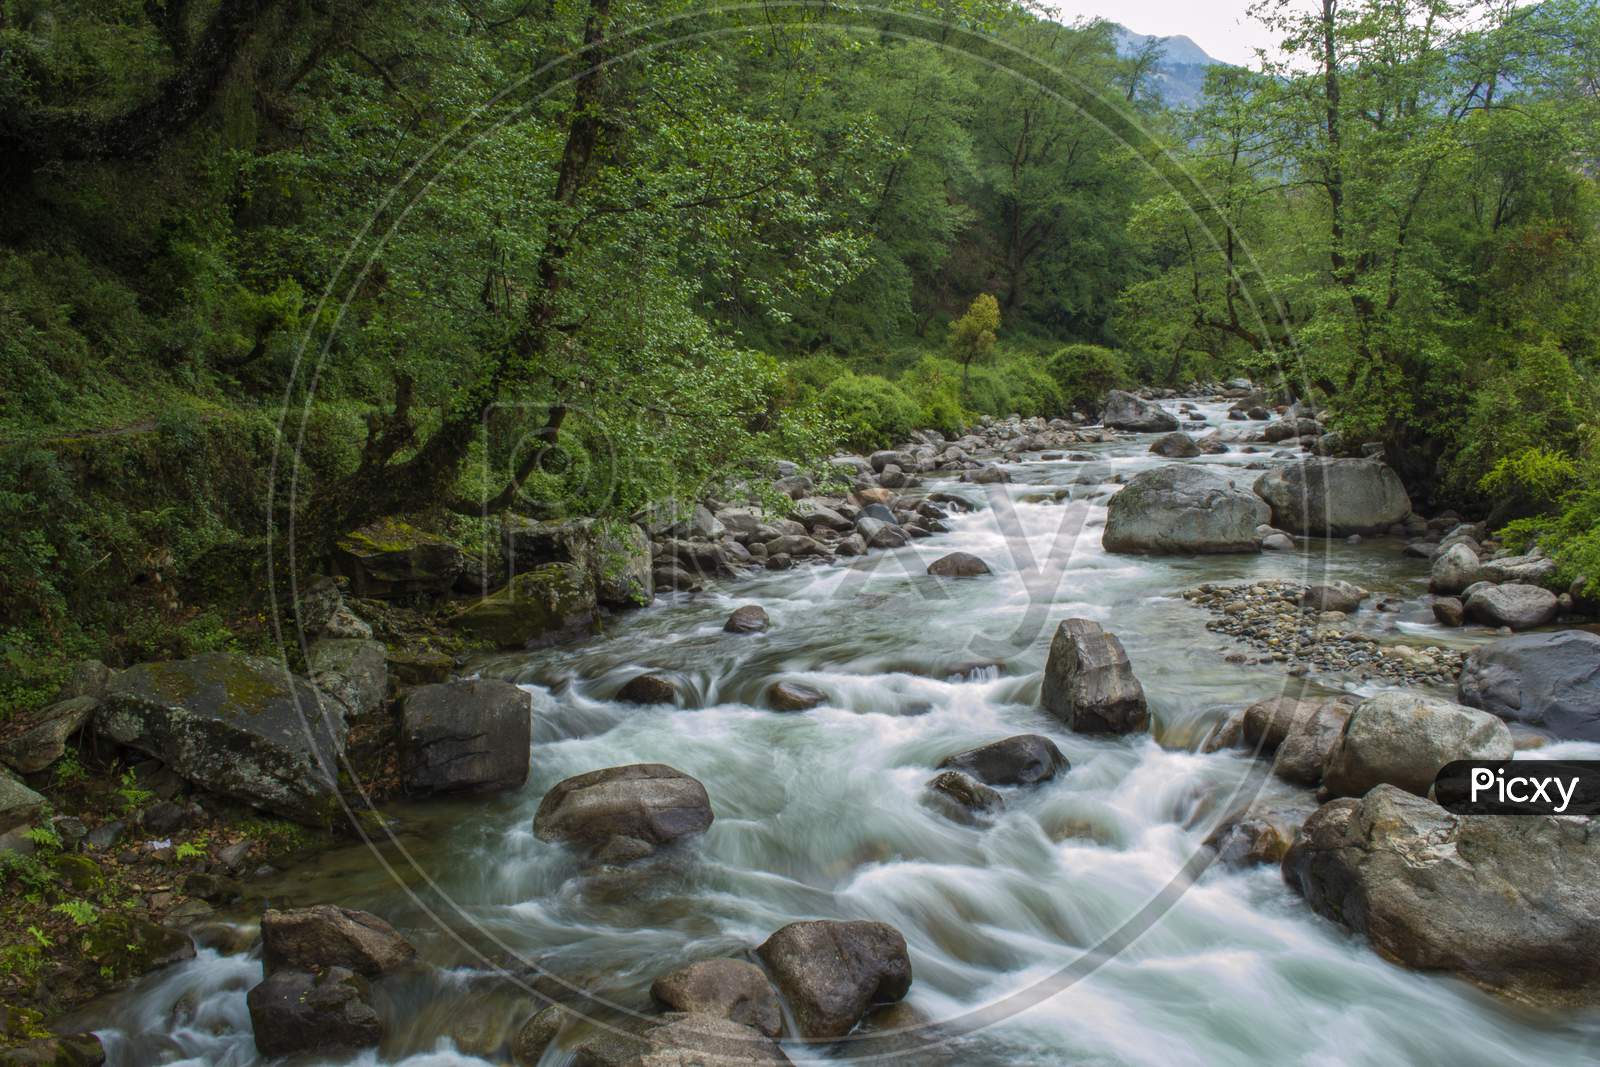 A Beautiful Mountain River Balkhila Flowing Through Rocks And Forest In A Small Village.